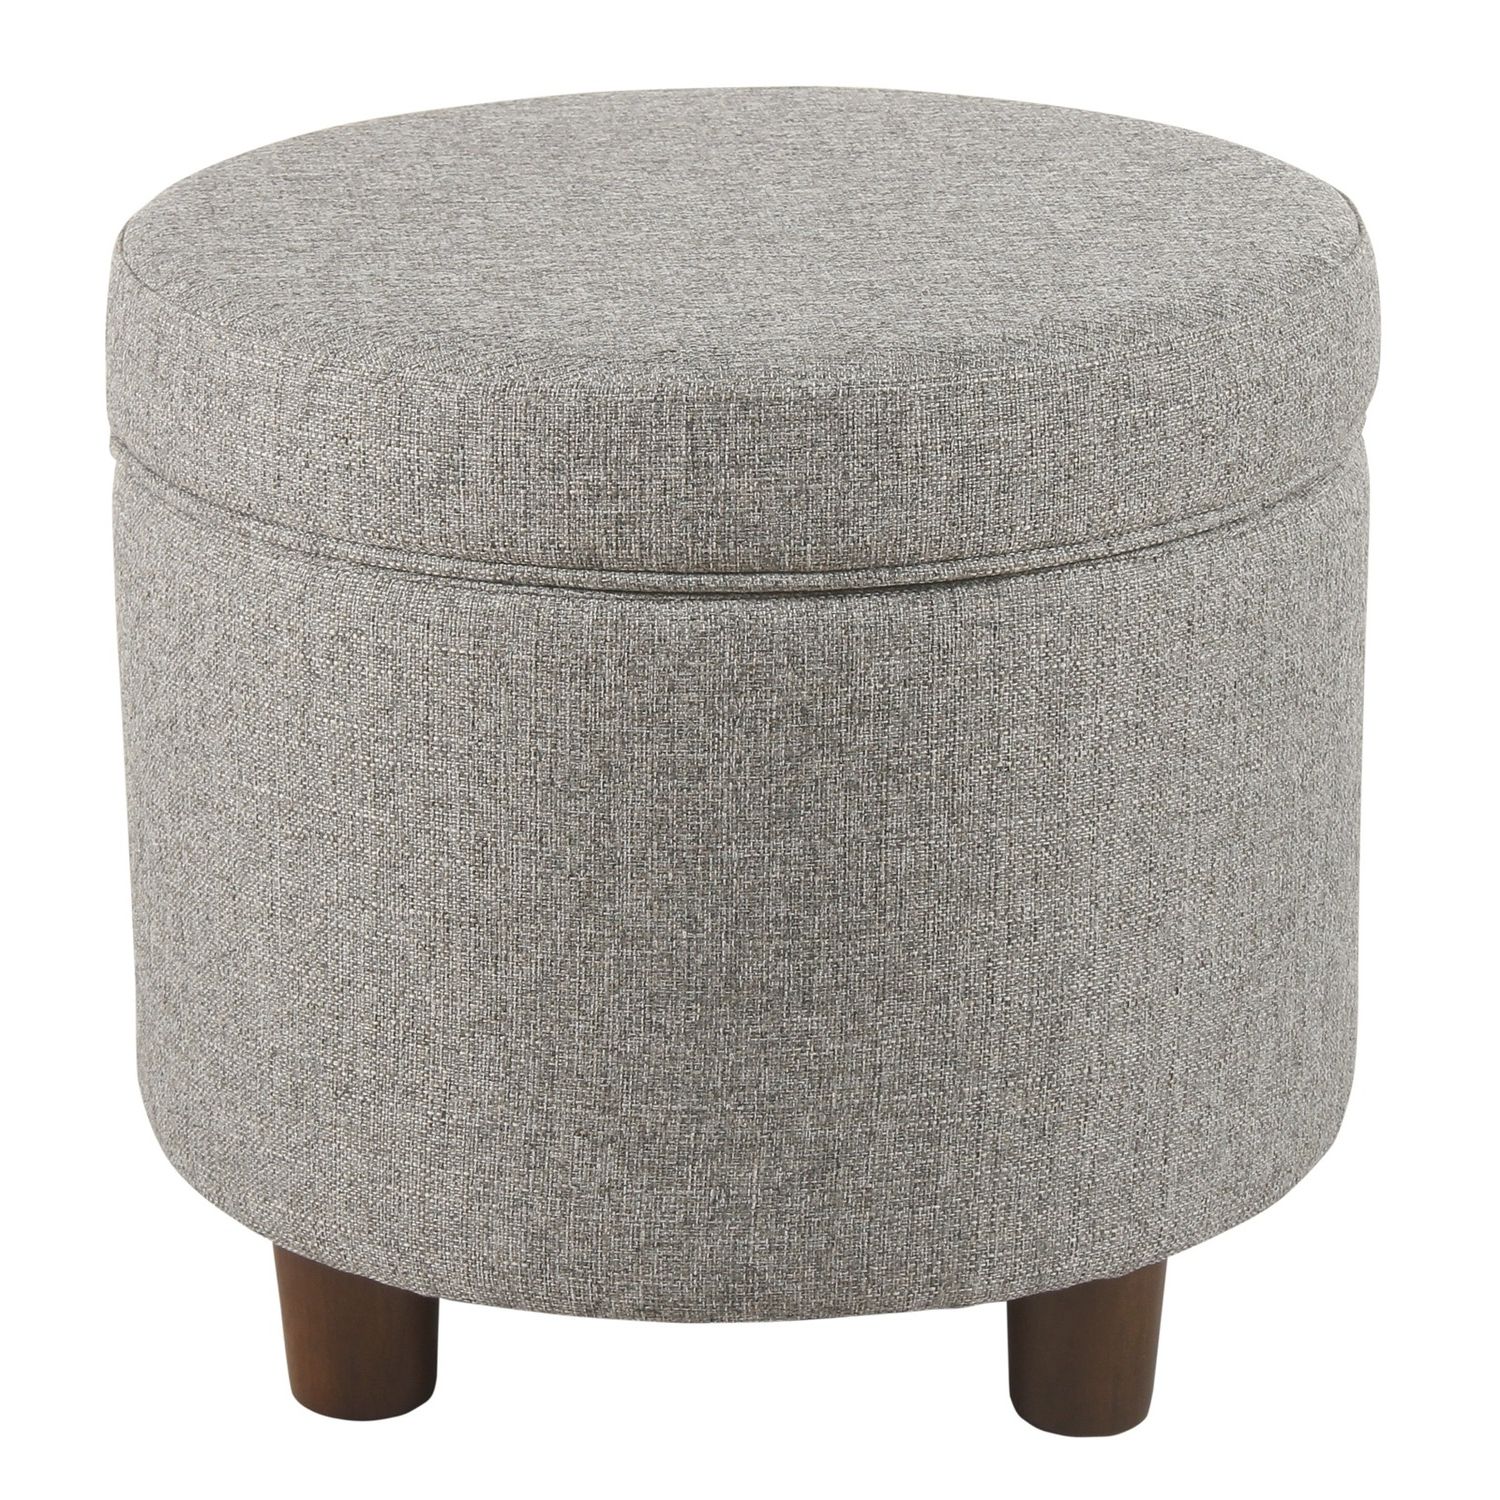 Light Gray Fabric Tufted Round Storage Ottomans Pertaining To 2019 Benzara Fabric Upholstered Round Wooden Ottoman With Lift Off Lid (View 8 of 10)